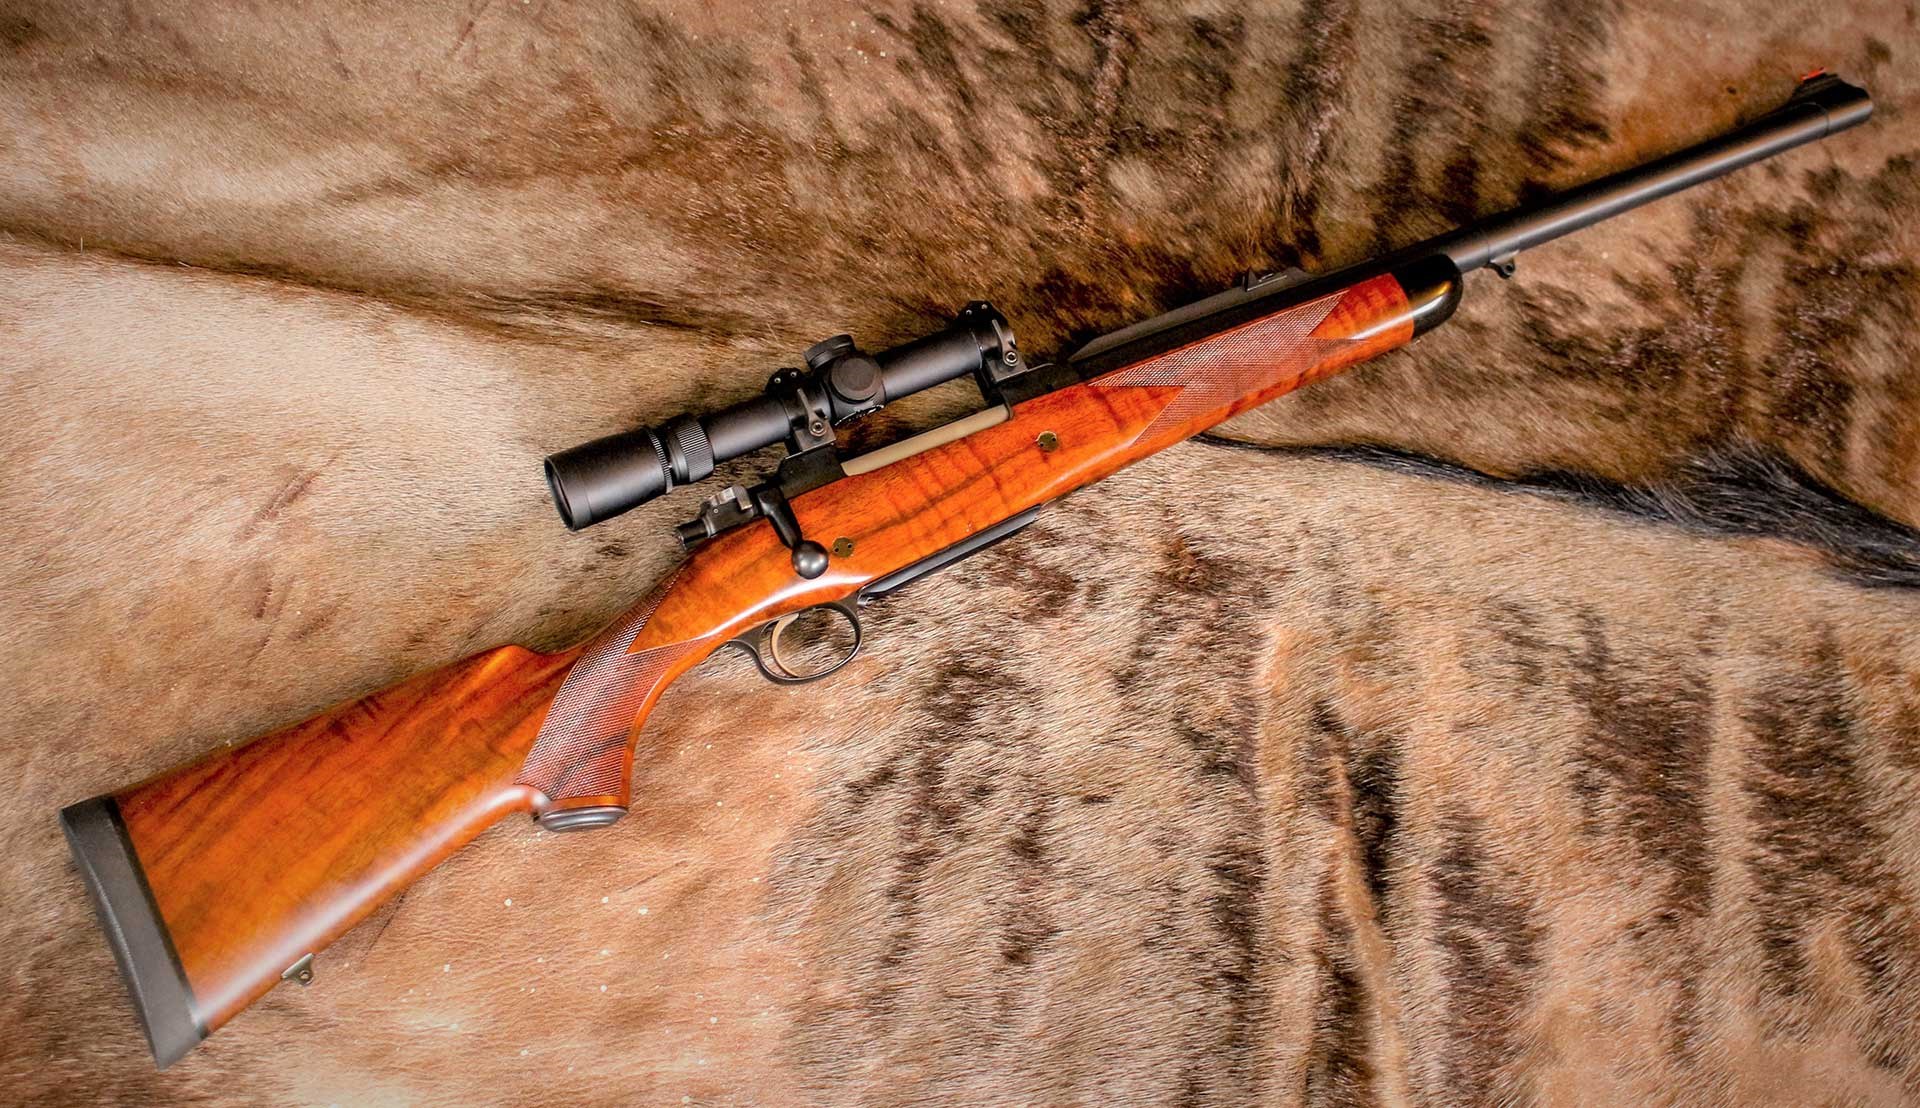 A .416 Rigby hunting rifle, shown full length, lying on a deerskin background.